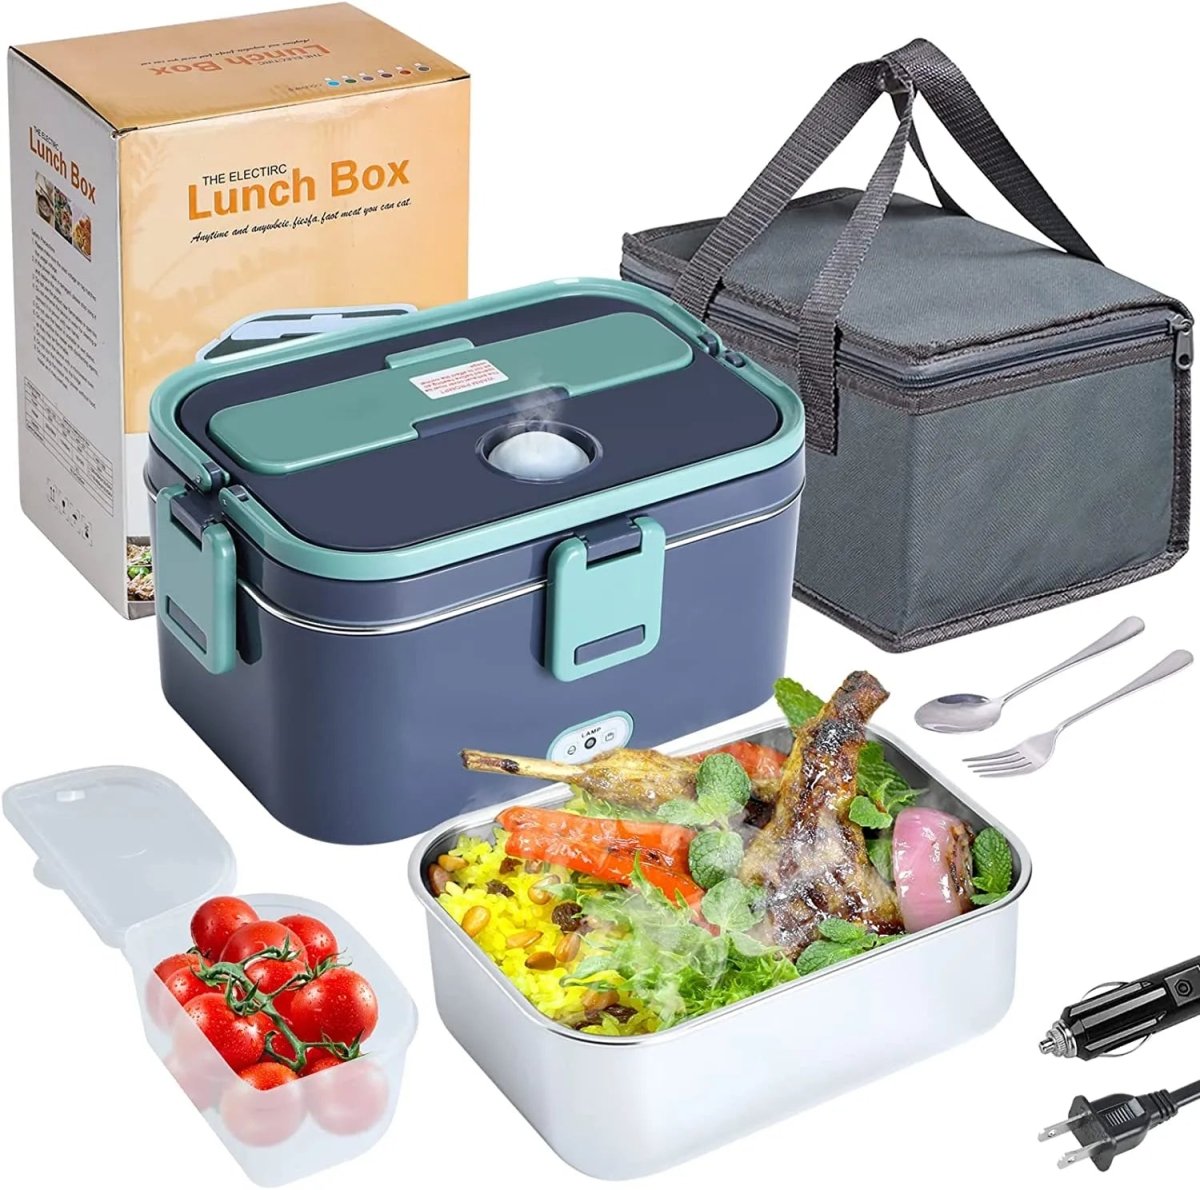 Portable Insulated Electric Heated Lunch Box - Sweet Sentimental GiftsPortable Insulated Electric Heated Lunch BoxExtrasInnovationSweet Sentimental Gifts39701877-US-plugPortable Insulated Electric Heated Lunch BoxUS plug613299491307